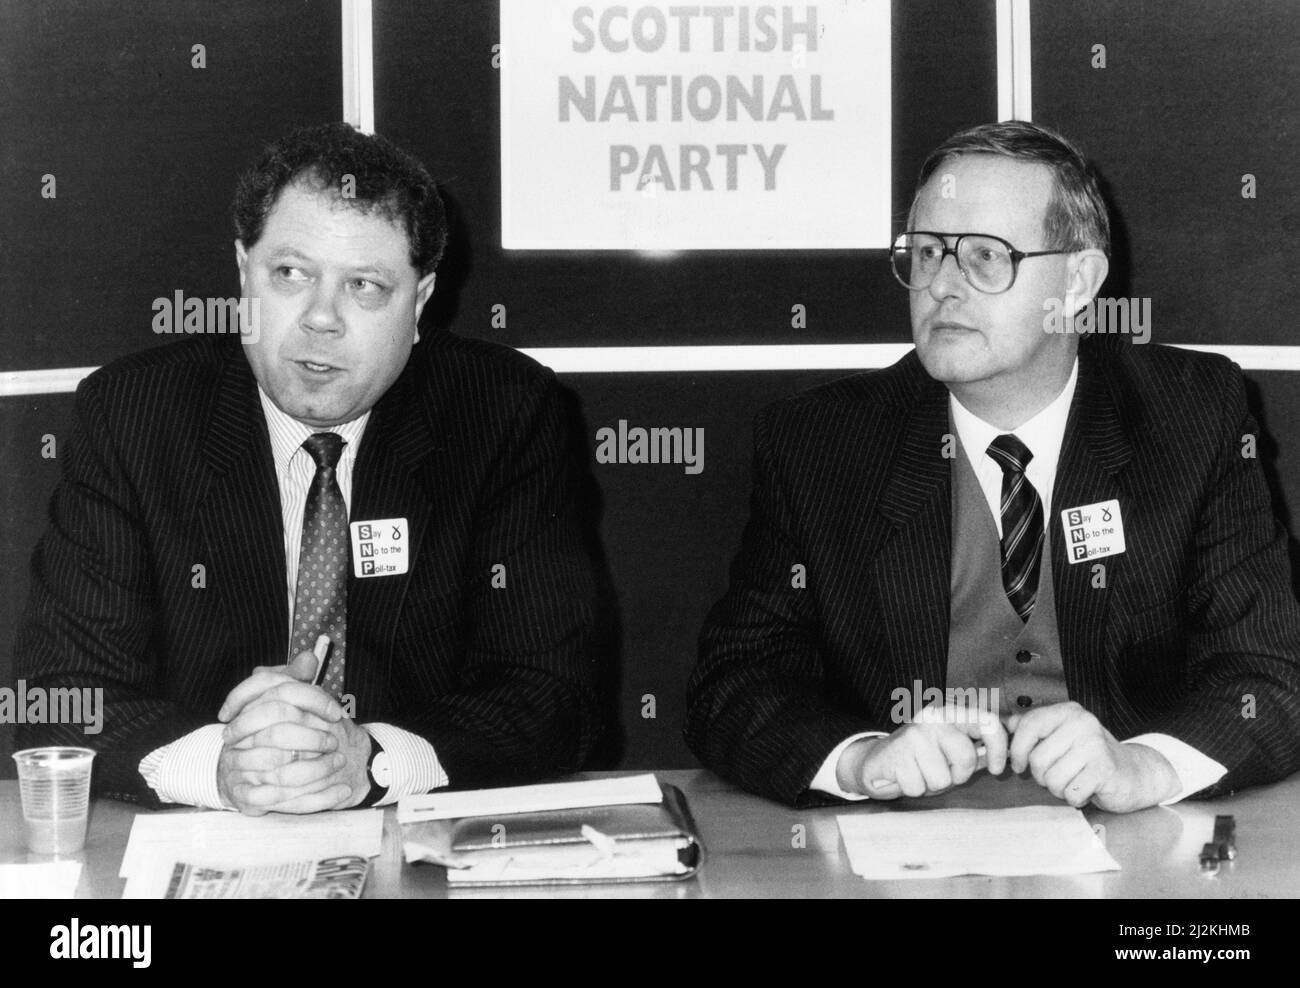 Glasgow Govan By-Election 1988 was held on 10th November 1988, caused by the resignation of Bruce Millan as Member of Parliament for the constituency following his appointment as a European Commissioner.  The result was seen as embarrassing for the Labour Party, with the former Labour MP Jim Sillars winning the seat for the Scottish National Party with a majority of 3,554 votes and a large swing from Labour to the SNP.  Our Picture Shows ... Jim Sillars SNP Candidate (left) and Gordon Wilson, SNP Press Conference, Friday 21st October 1988 Stock Photo